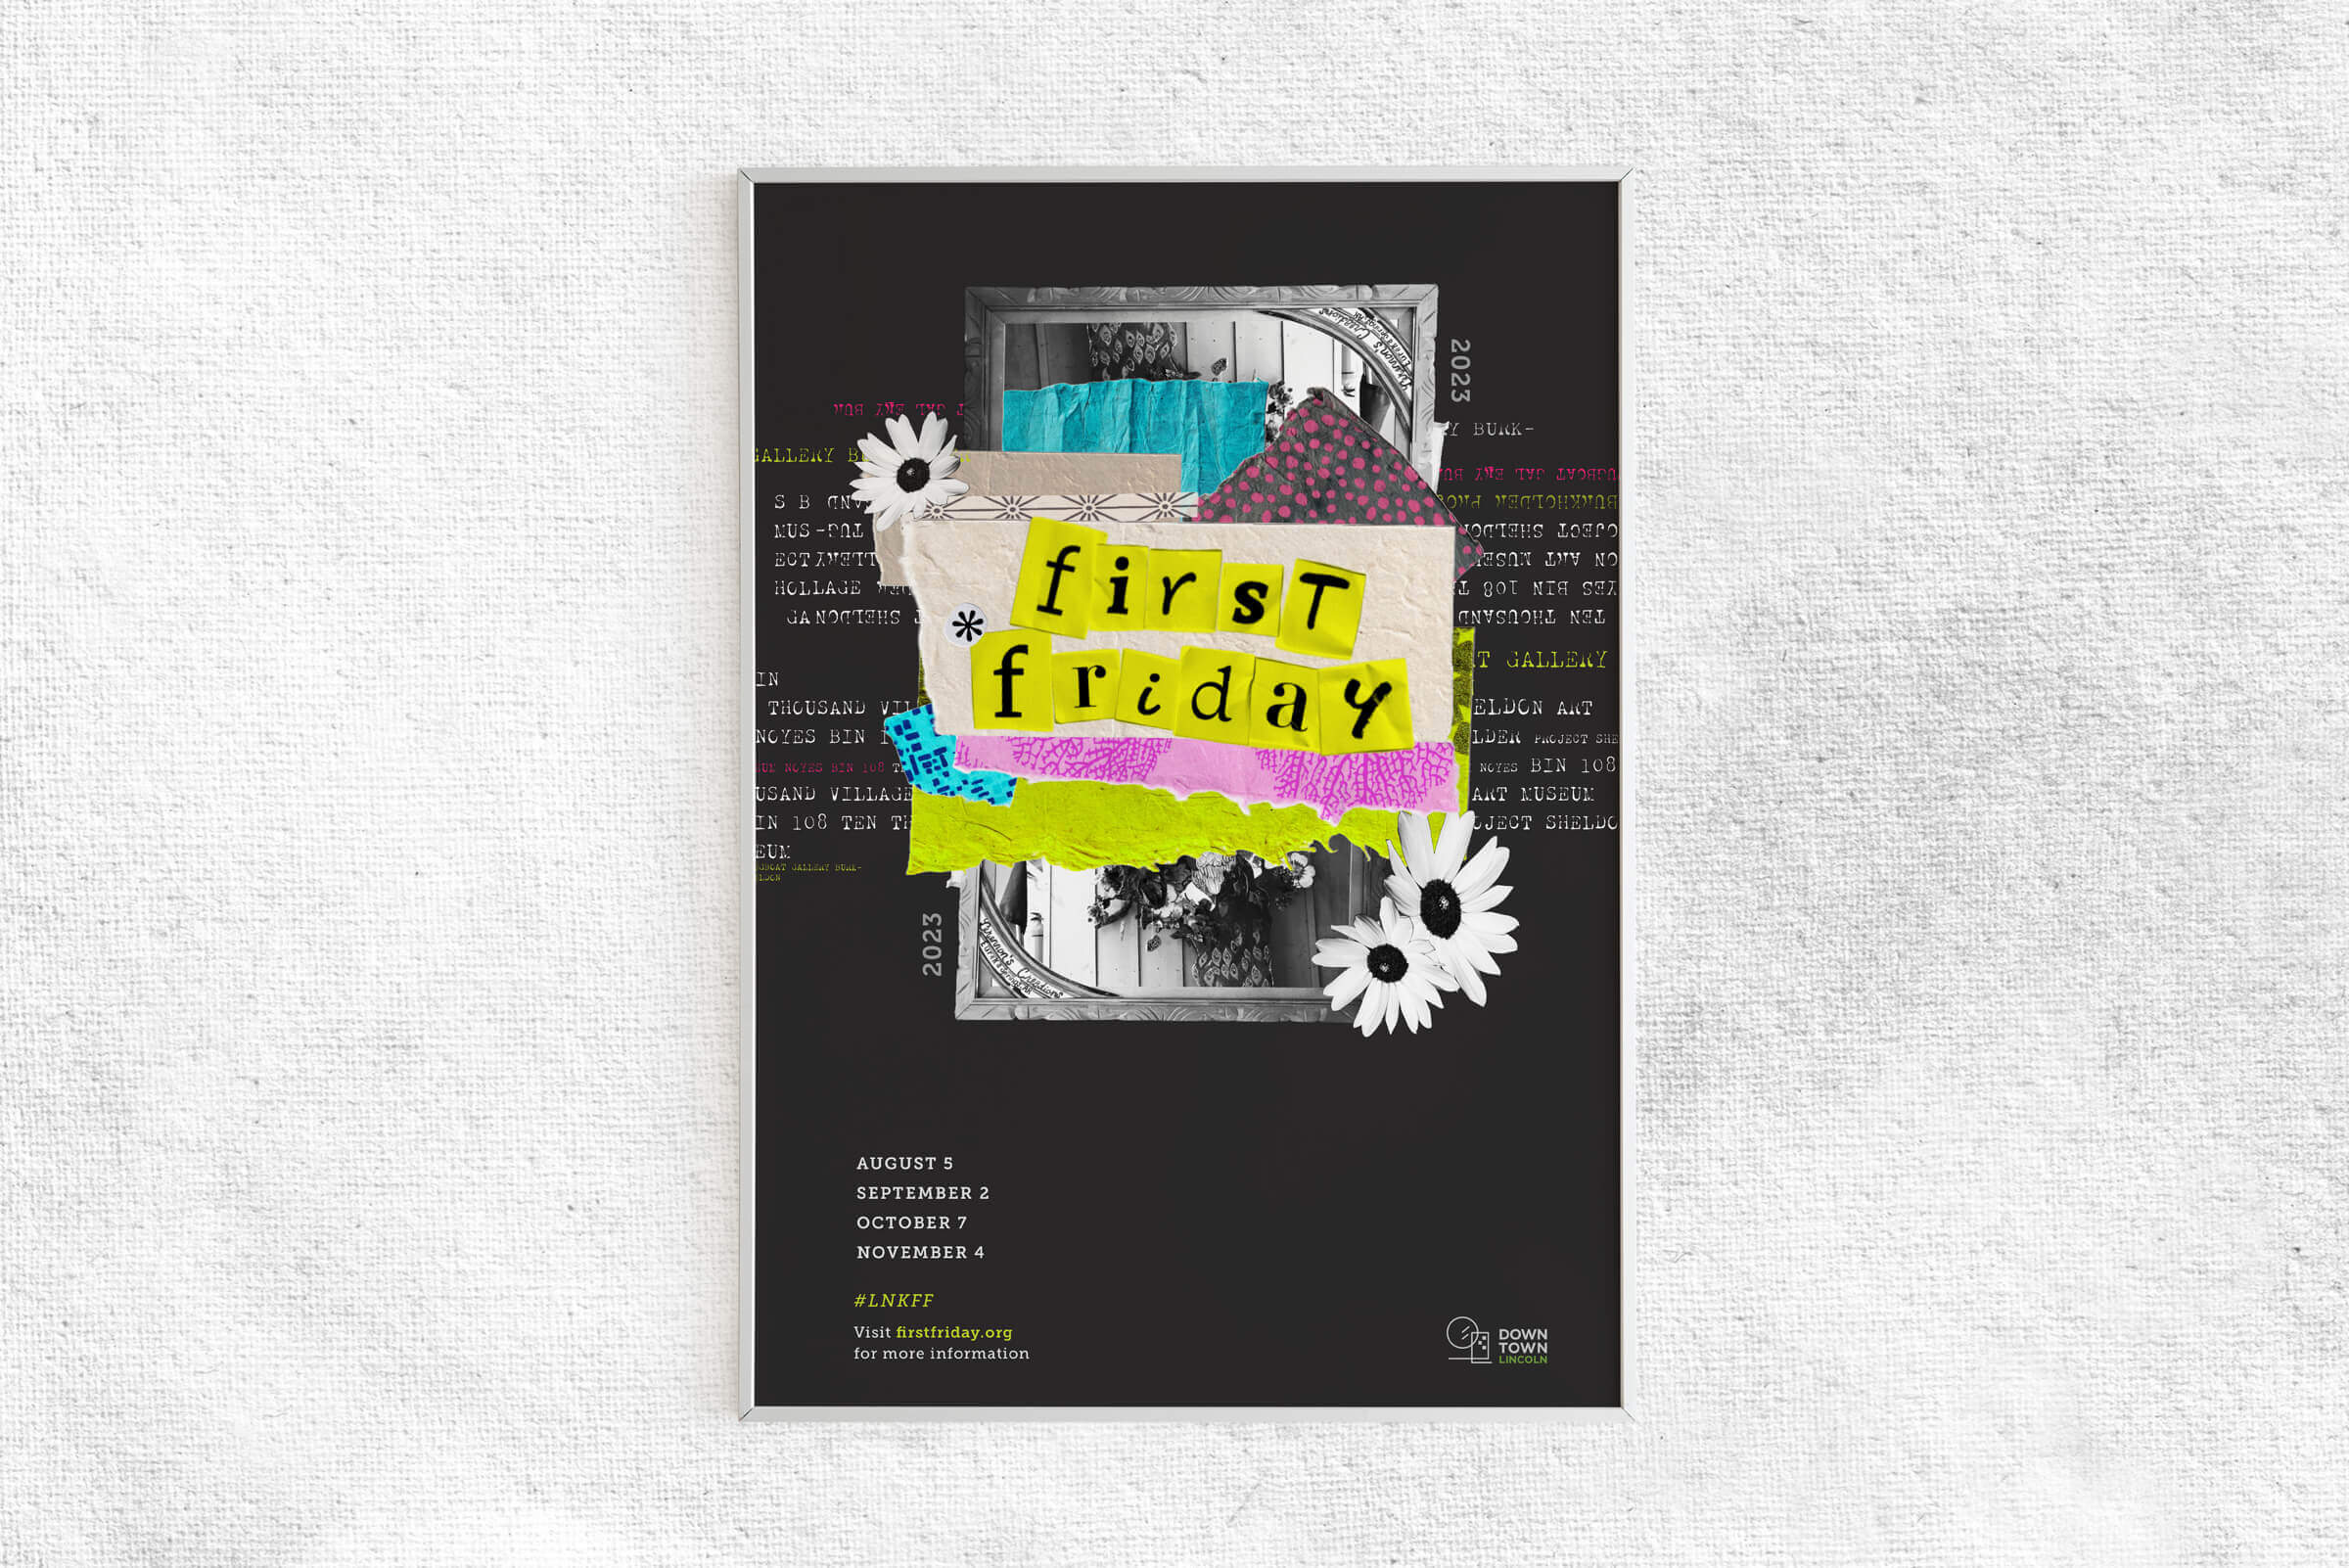 Photo of a poster design advertising First Friday events